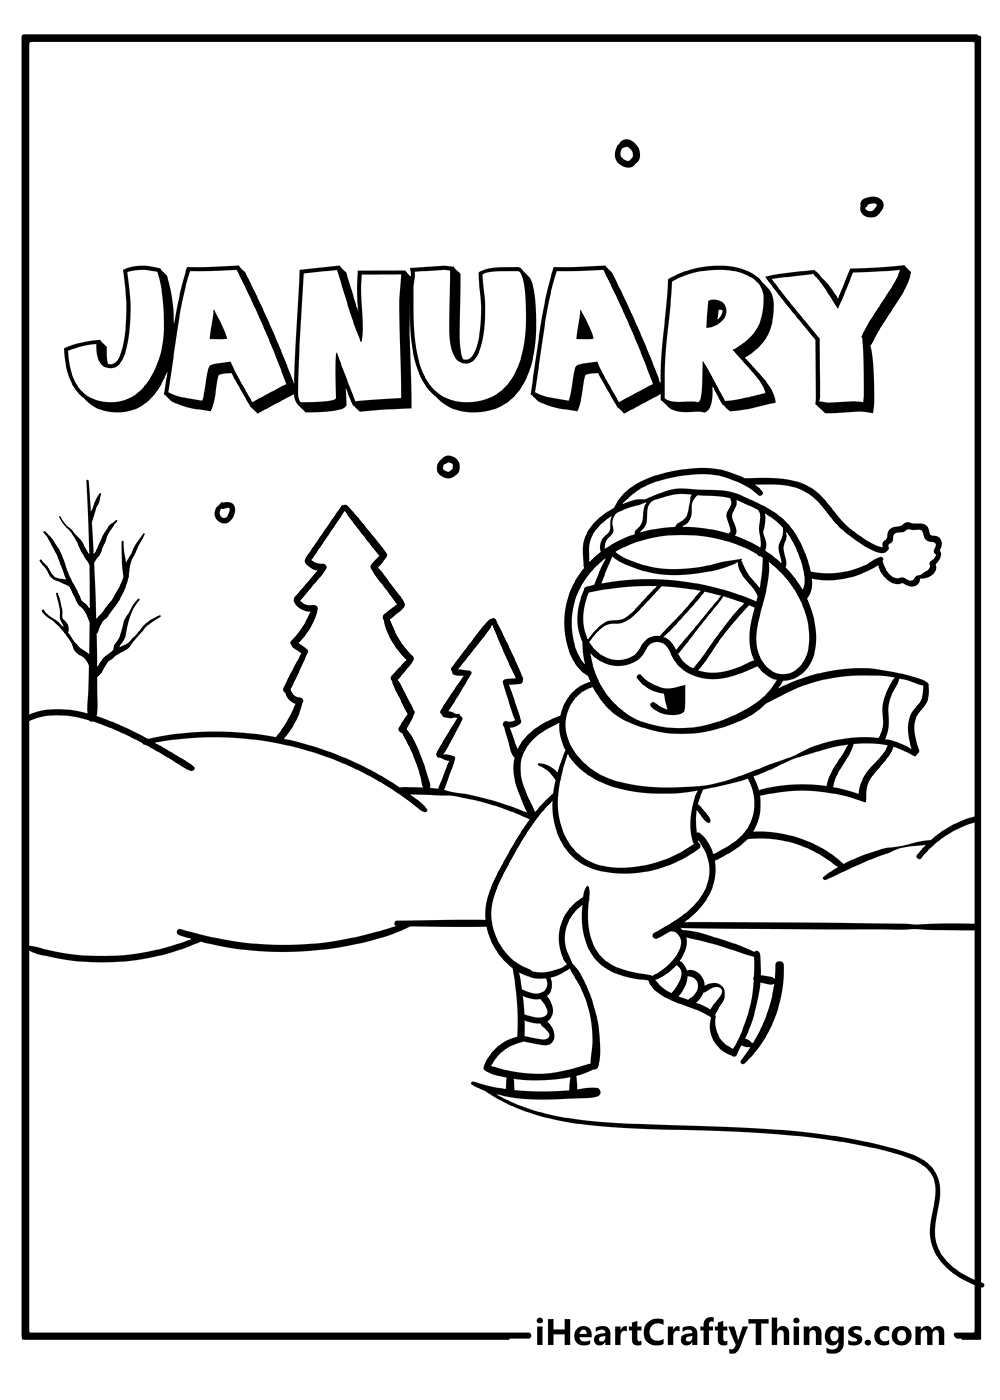 January Coloring Pages for adults free printable